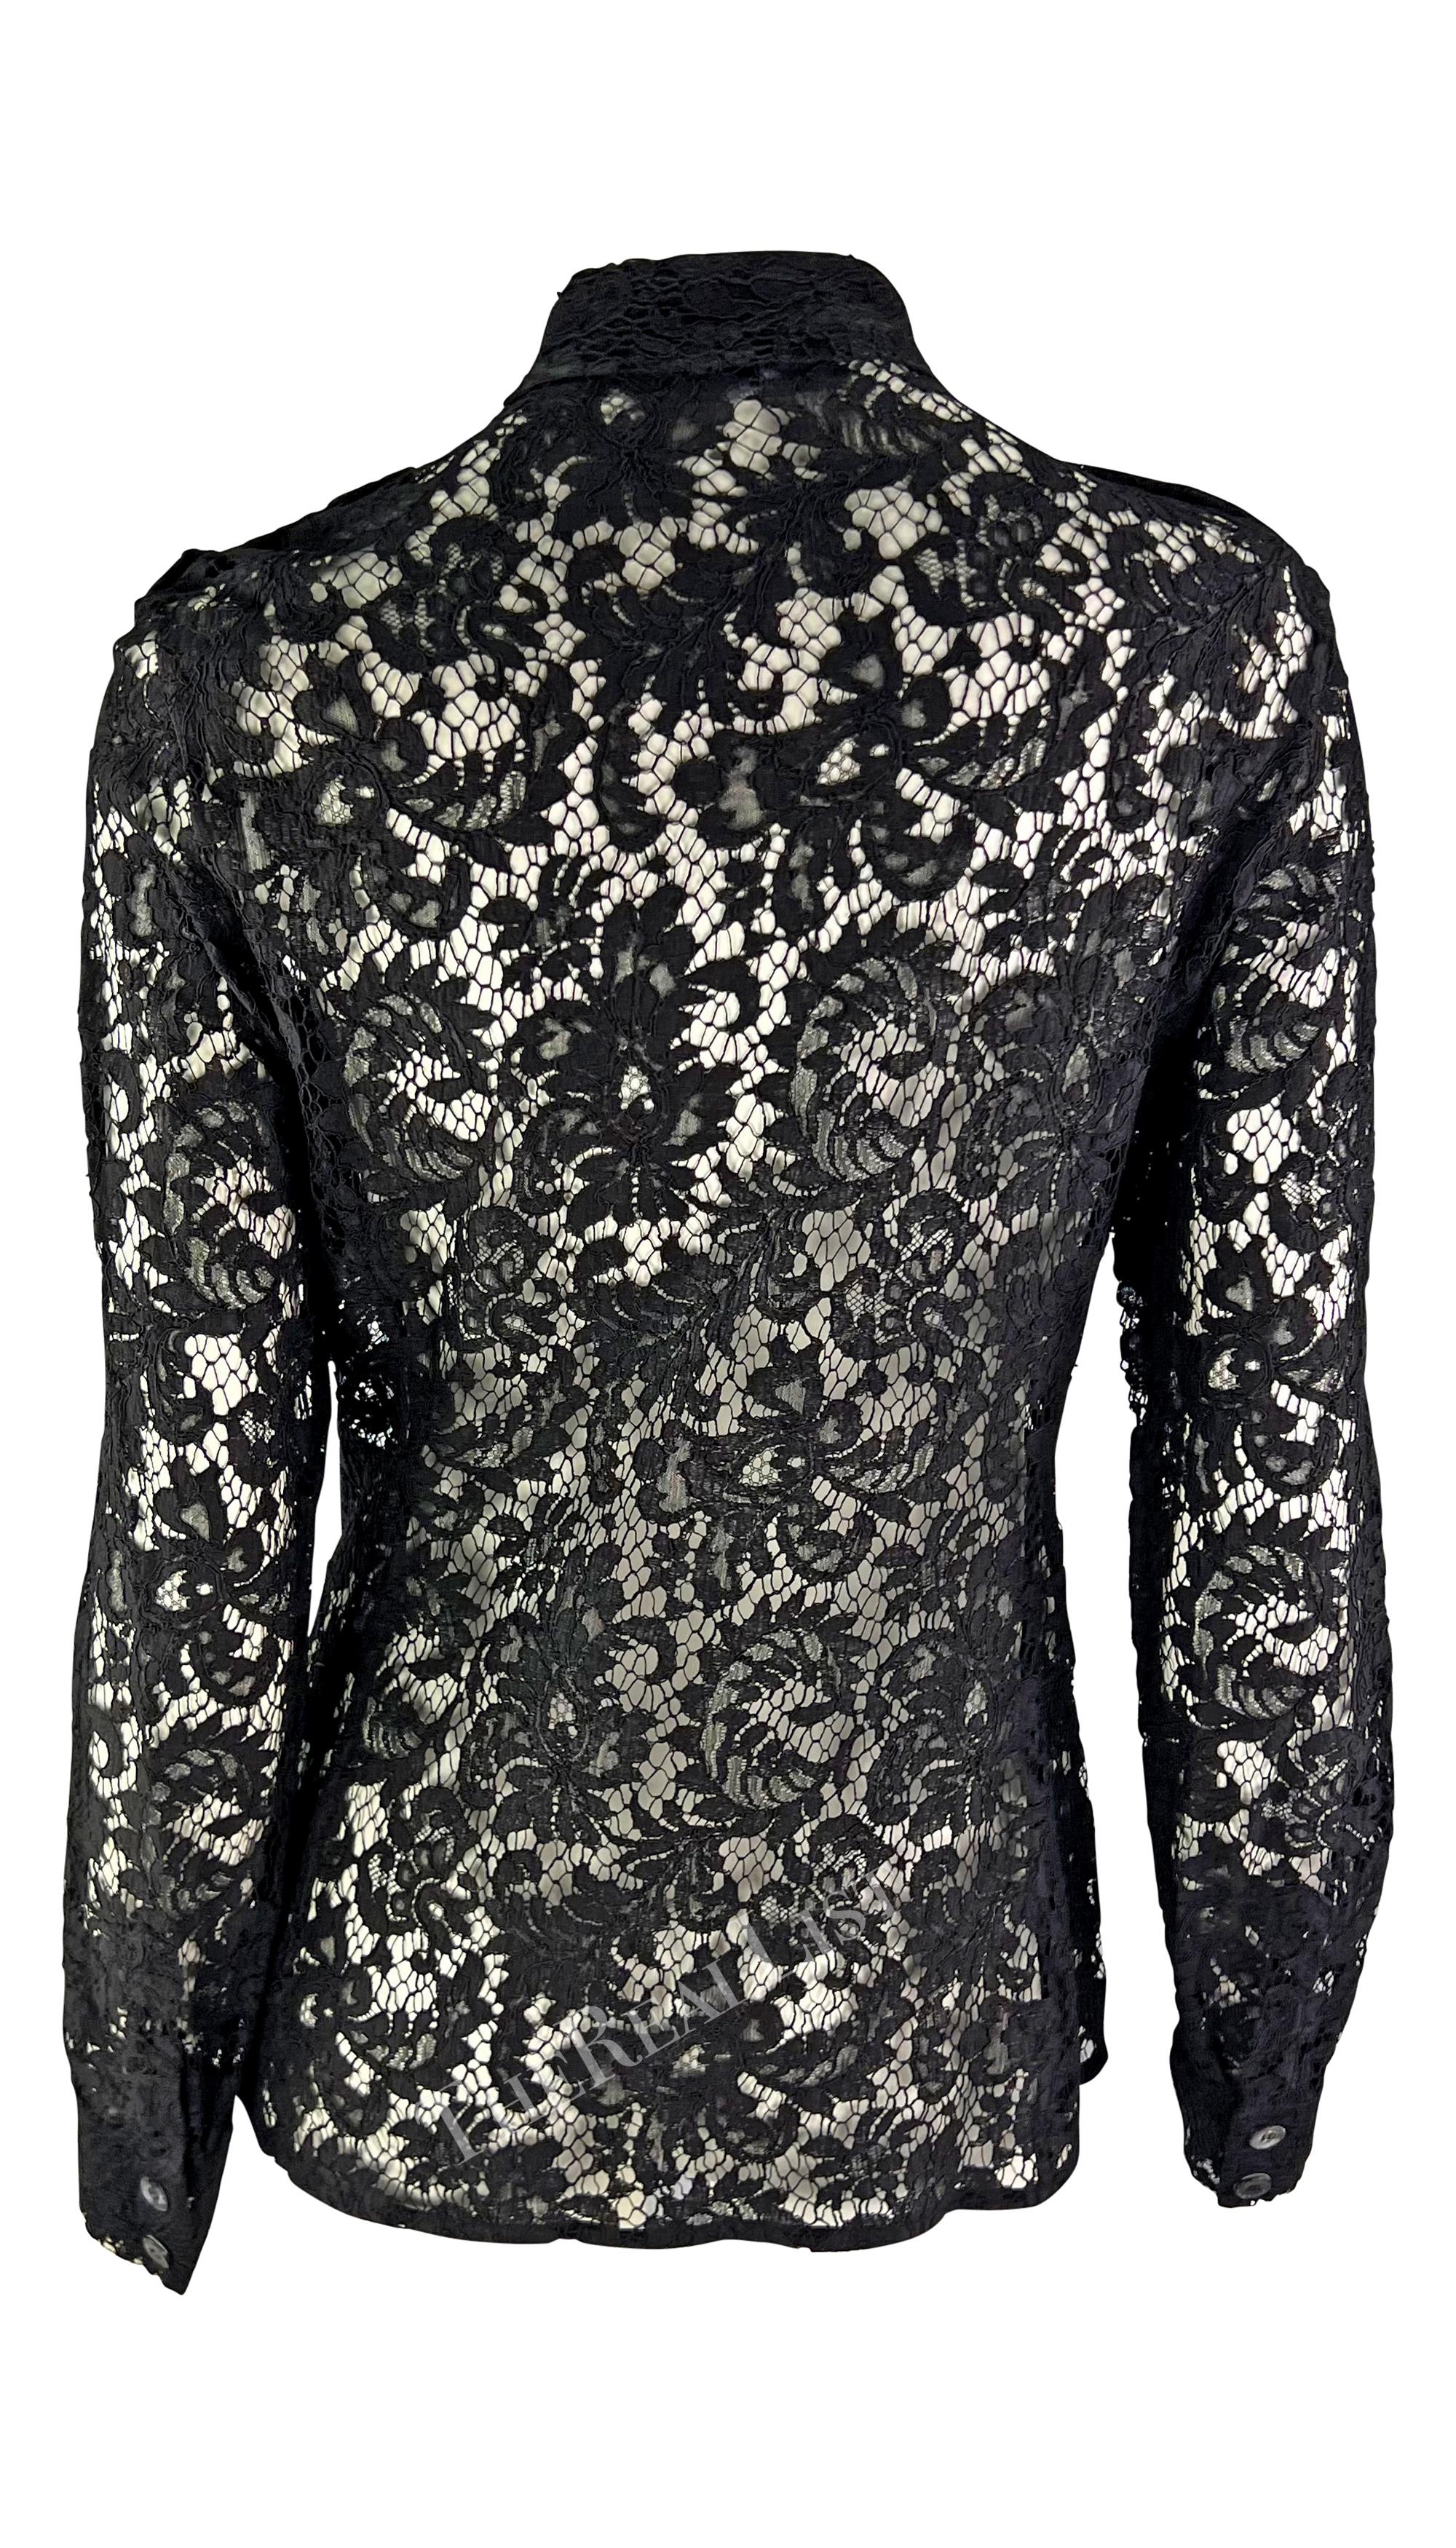 S/S 1996 Gucci by Tom Ford Sheer Black Lace Button Up Shirt For Sale 3